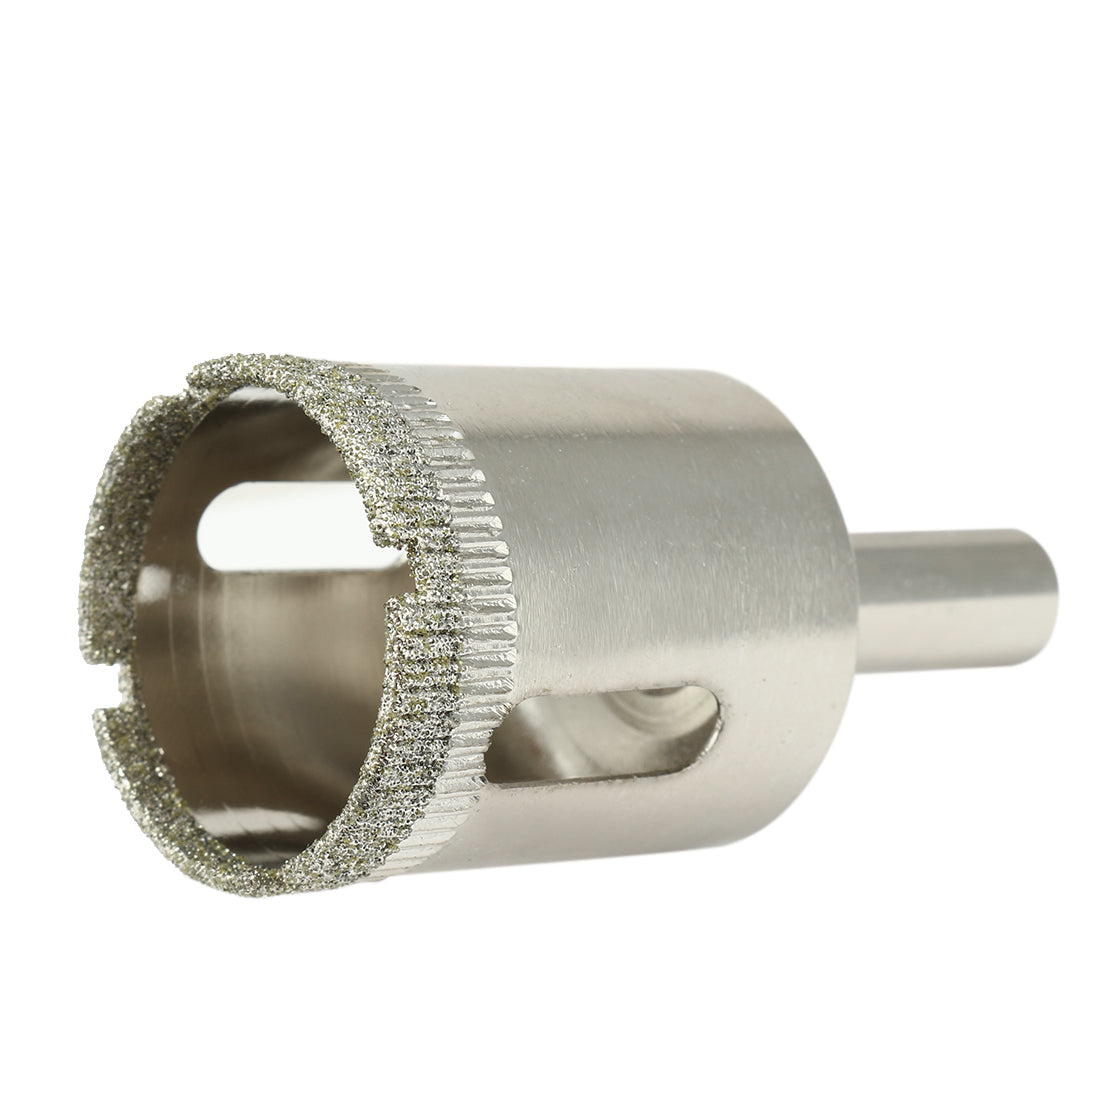 uxcell Uxcell Diamond Coated Glass Hole Saw Drill Bit for Ceramic Tile